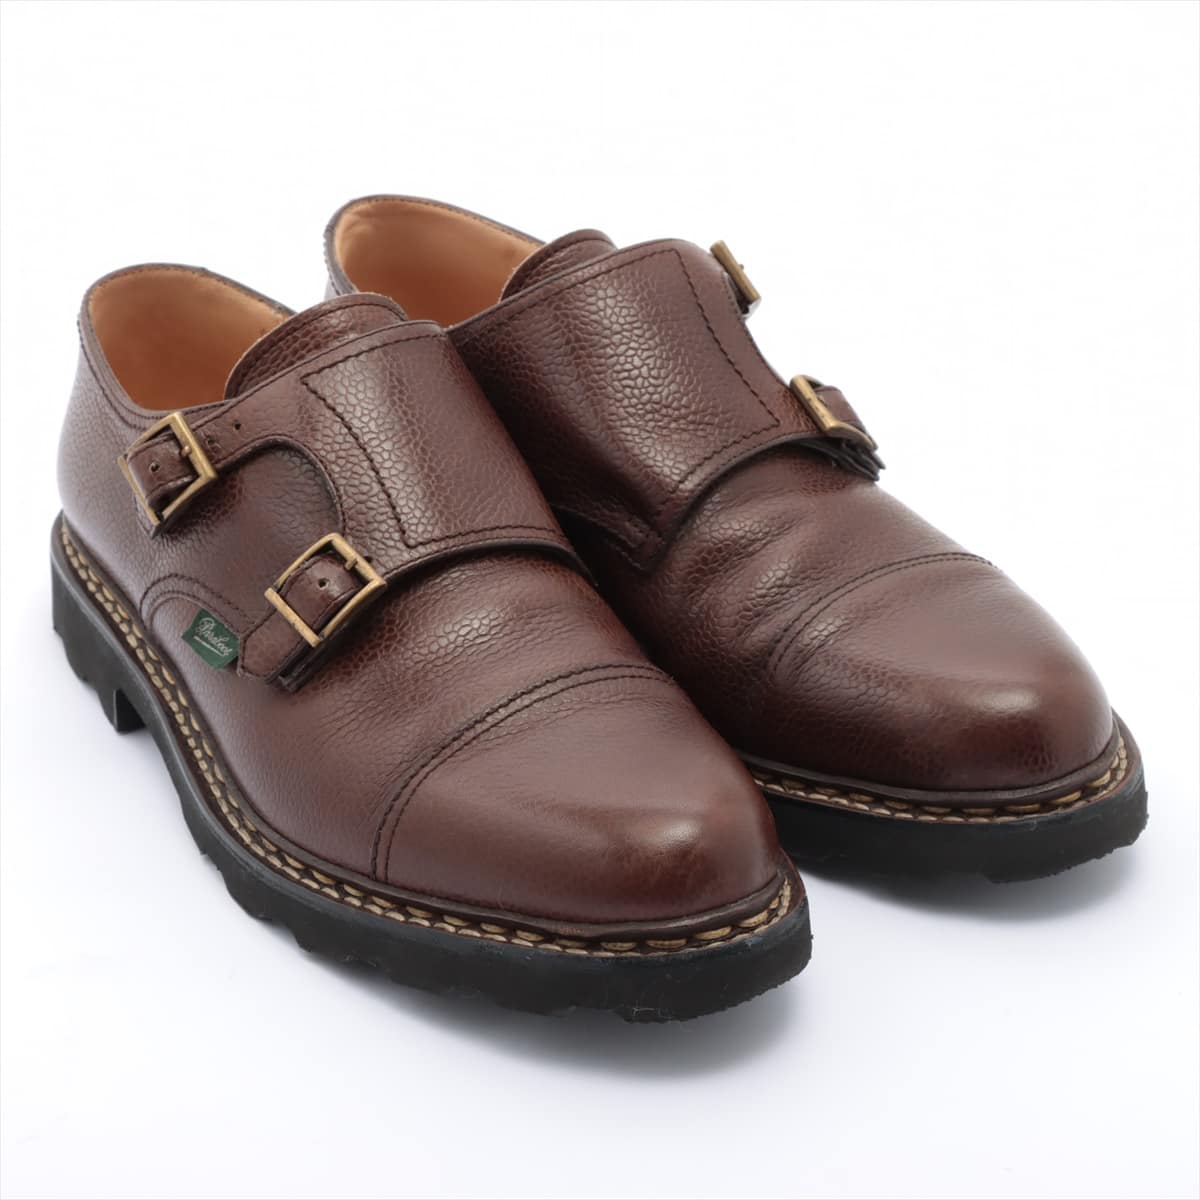 Paraboot William Leather Shoes 8 Men's Brown Double monk